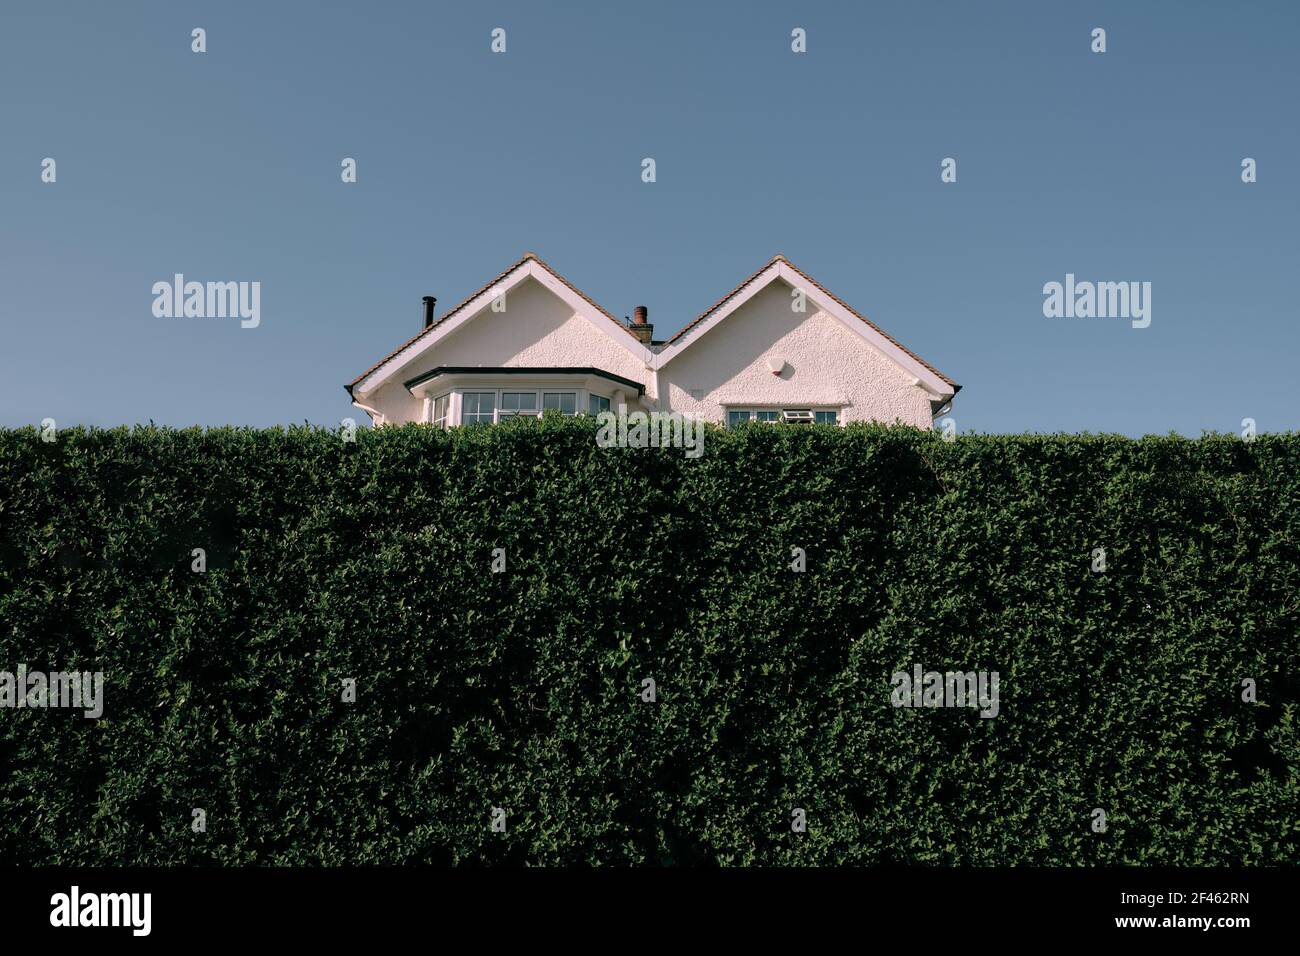 M Shaped / Double Pitched / Double Gabled Roof suburban house architecture half hidden property behind a high green garden hedge & blue sky. Stock Photo